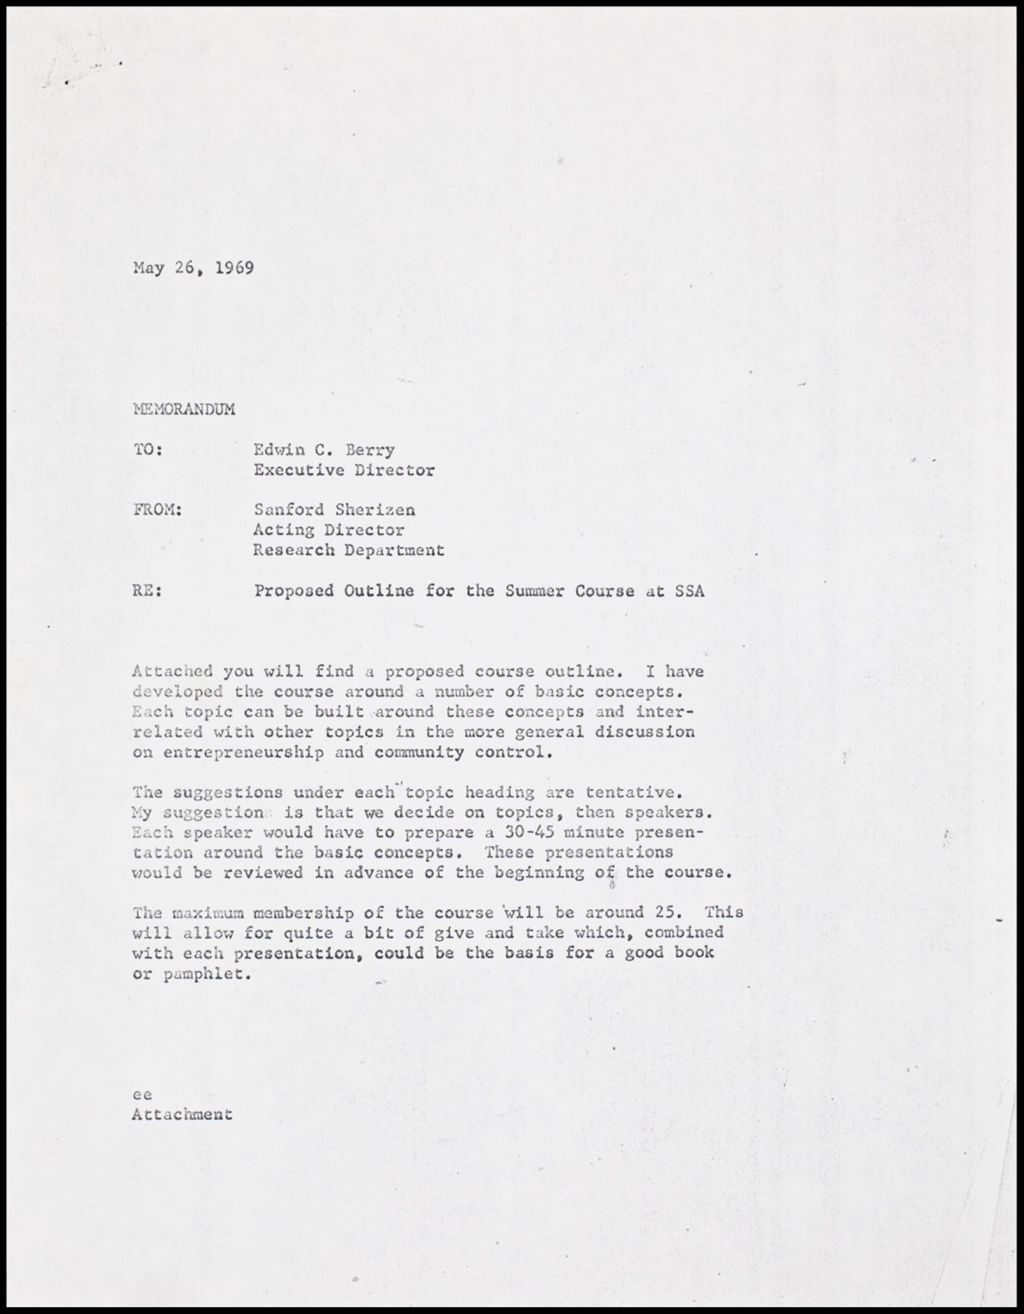 Course Outline - Effecting Change in Racism in American Society, 1969 (Folder II-2253)